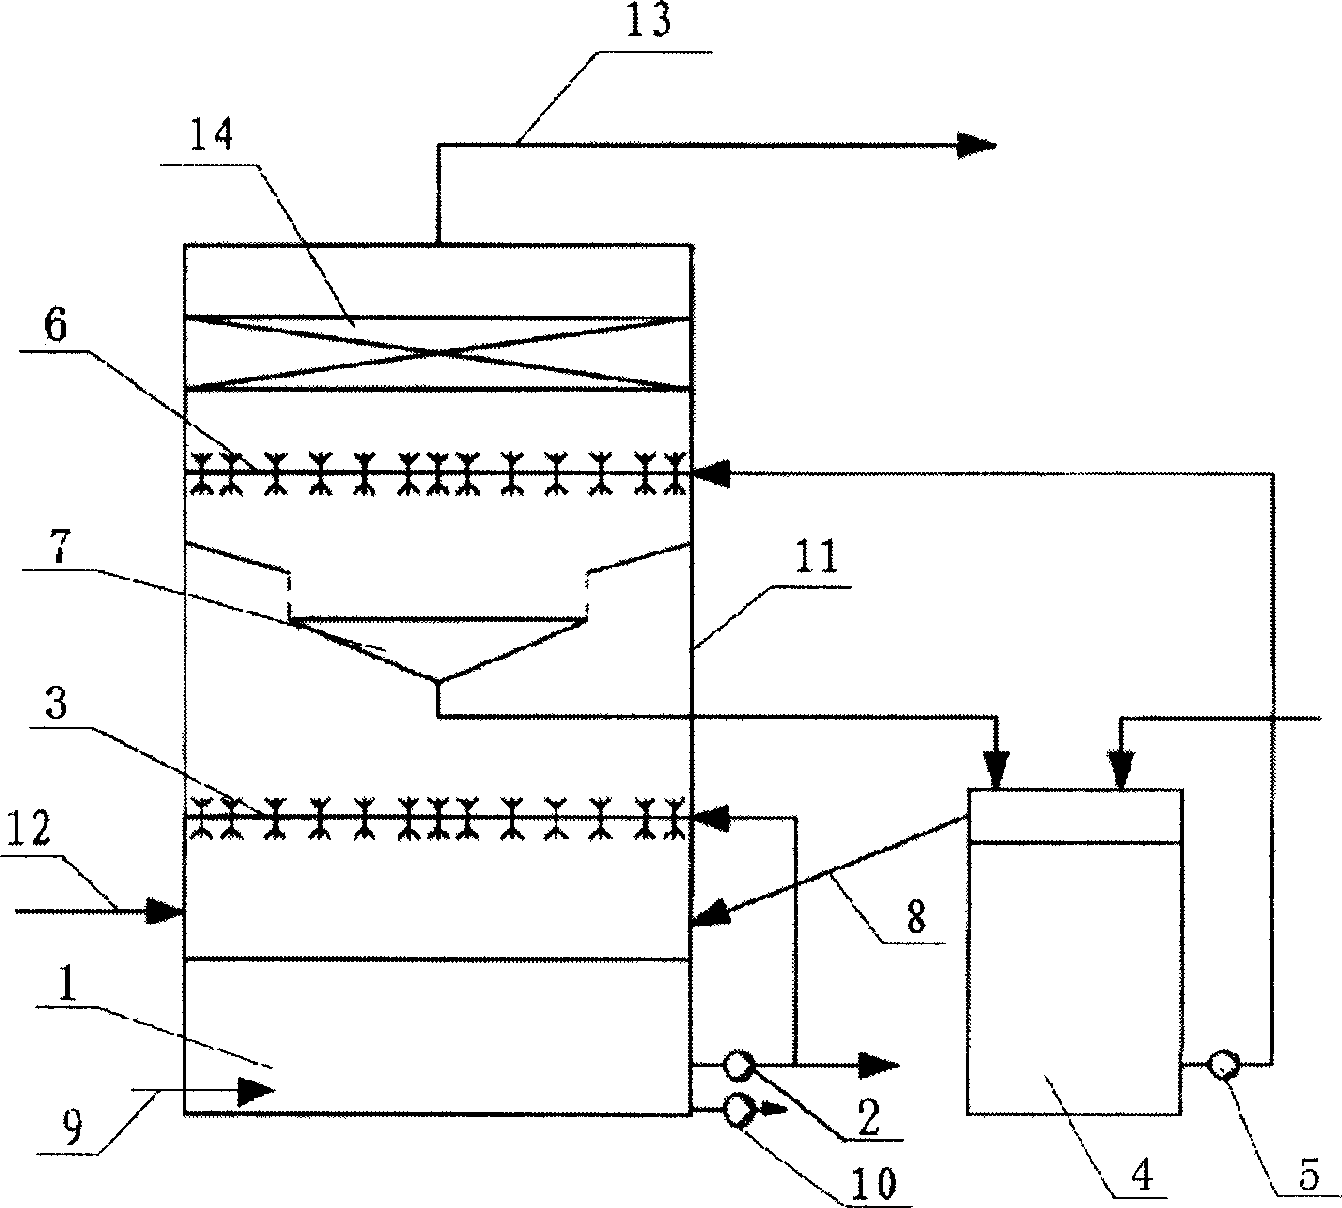 Process for flue gas desulfurization by limestone/lime-gypsum wet method and double circulation loop